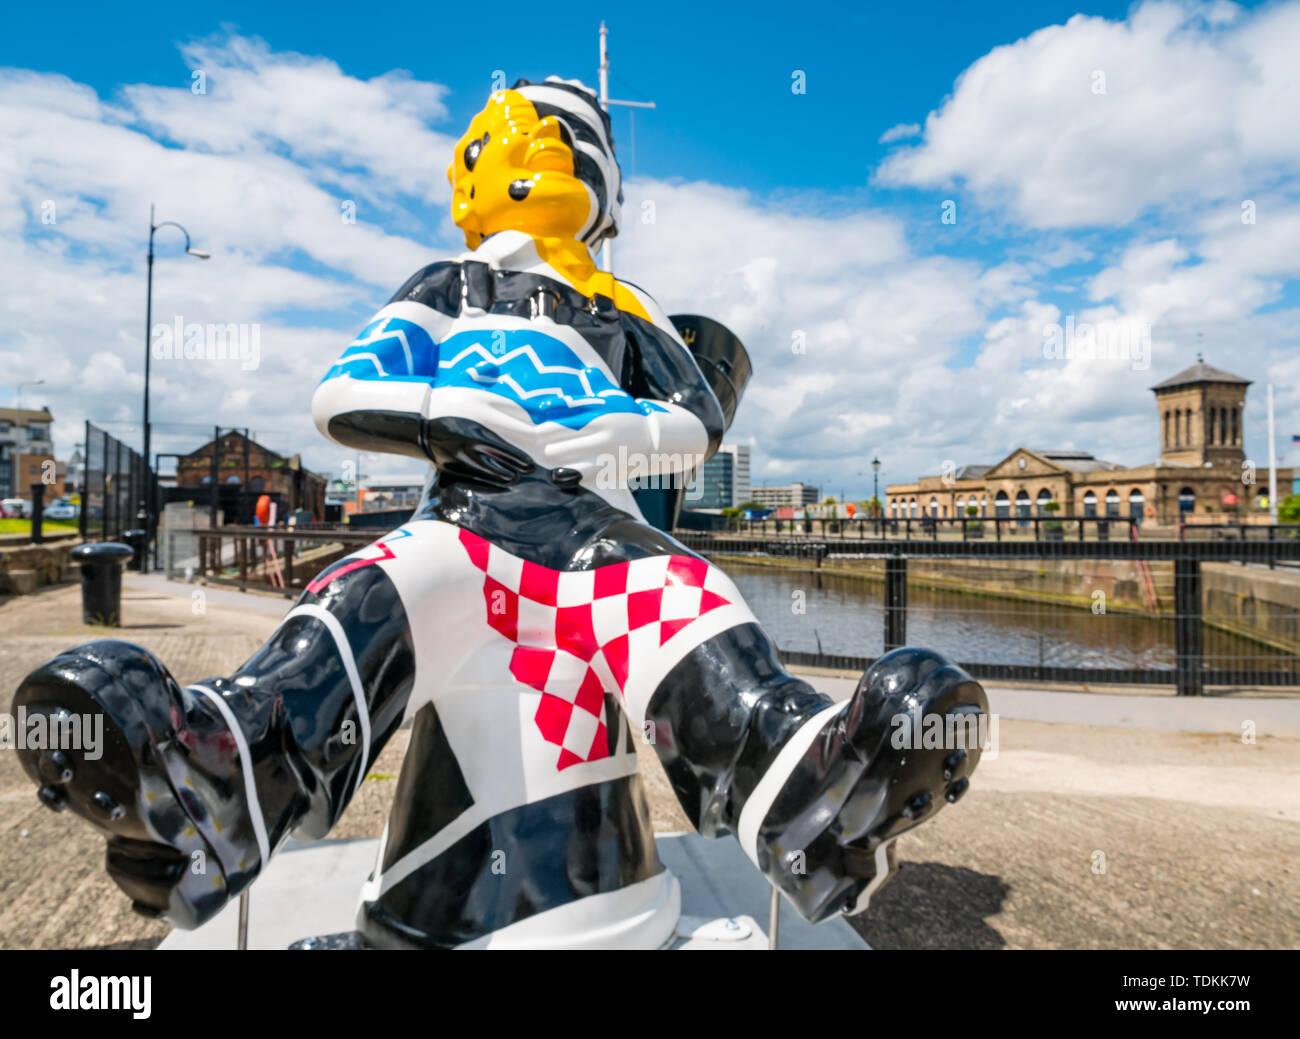 Leith, Edinburgh, Scotland, United Kingdom, 17 June 2019. Oor Wullie's Big Bucket Trail: An art trail of 200 Oor Wullie sculptures appear in Scottish cities in a mass arts event that lasts until August 30th. Oor Wullie is an iconic Scottish cartoon character from the Sunday Post newspaper. The sculptures will be auctioned to raise money for charities There are 5 in the Leith area, and 60 in Edinburgh altogether. Bobby Dazzler by Scott Dawson and Rachel Miller in Alexandra Dock, Leith harbour Stock Photo